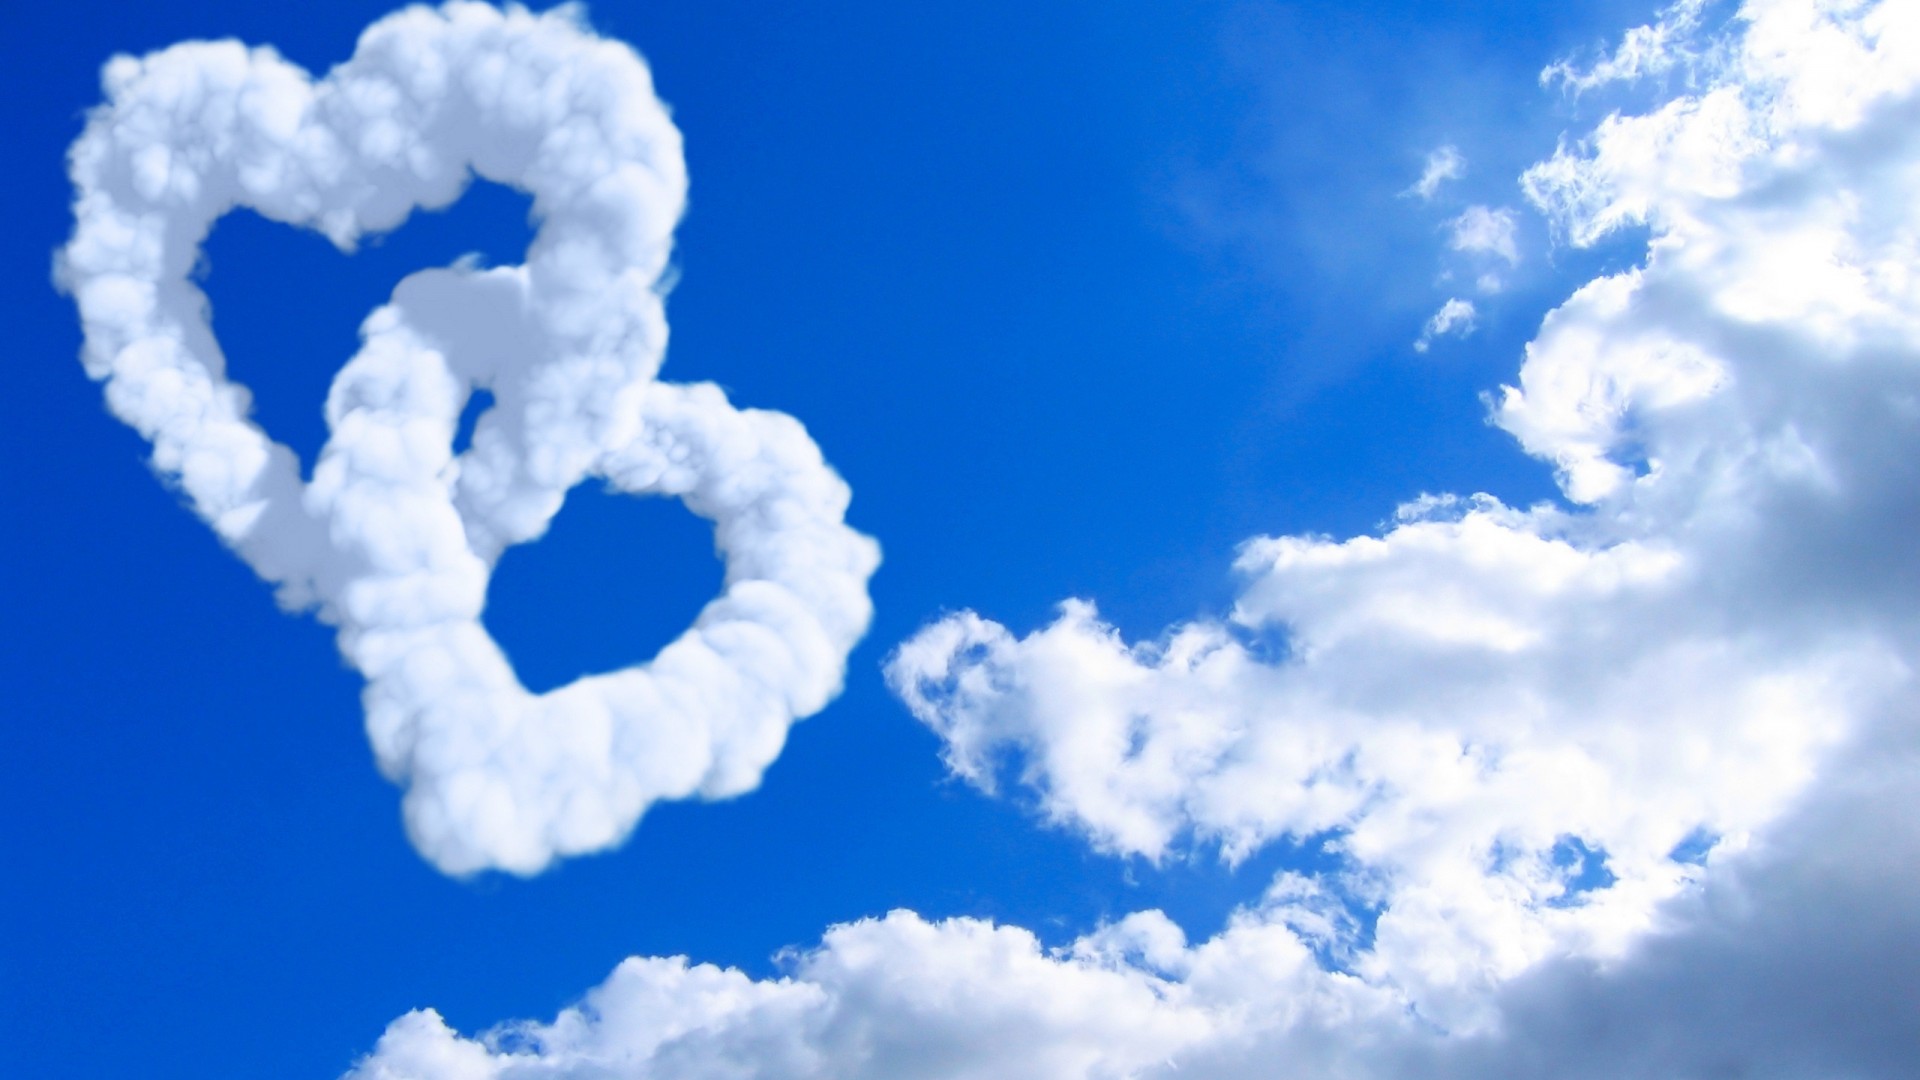 Two Hearts in The Sky - High Definition, High Resolution HD Wallpapers : High  Definition, High Resolution HD Wallpapers